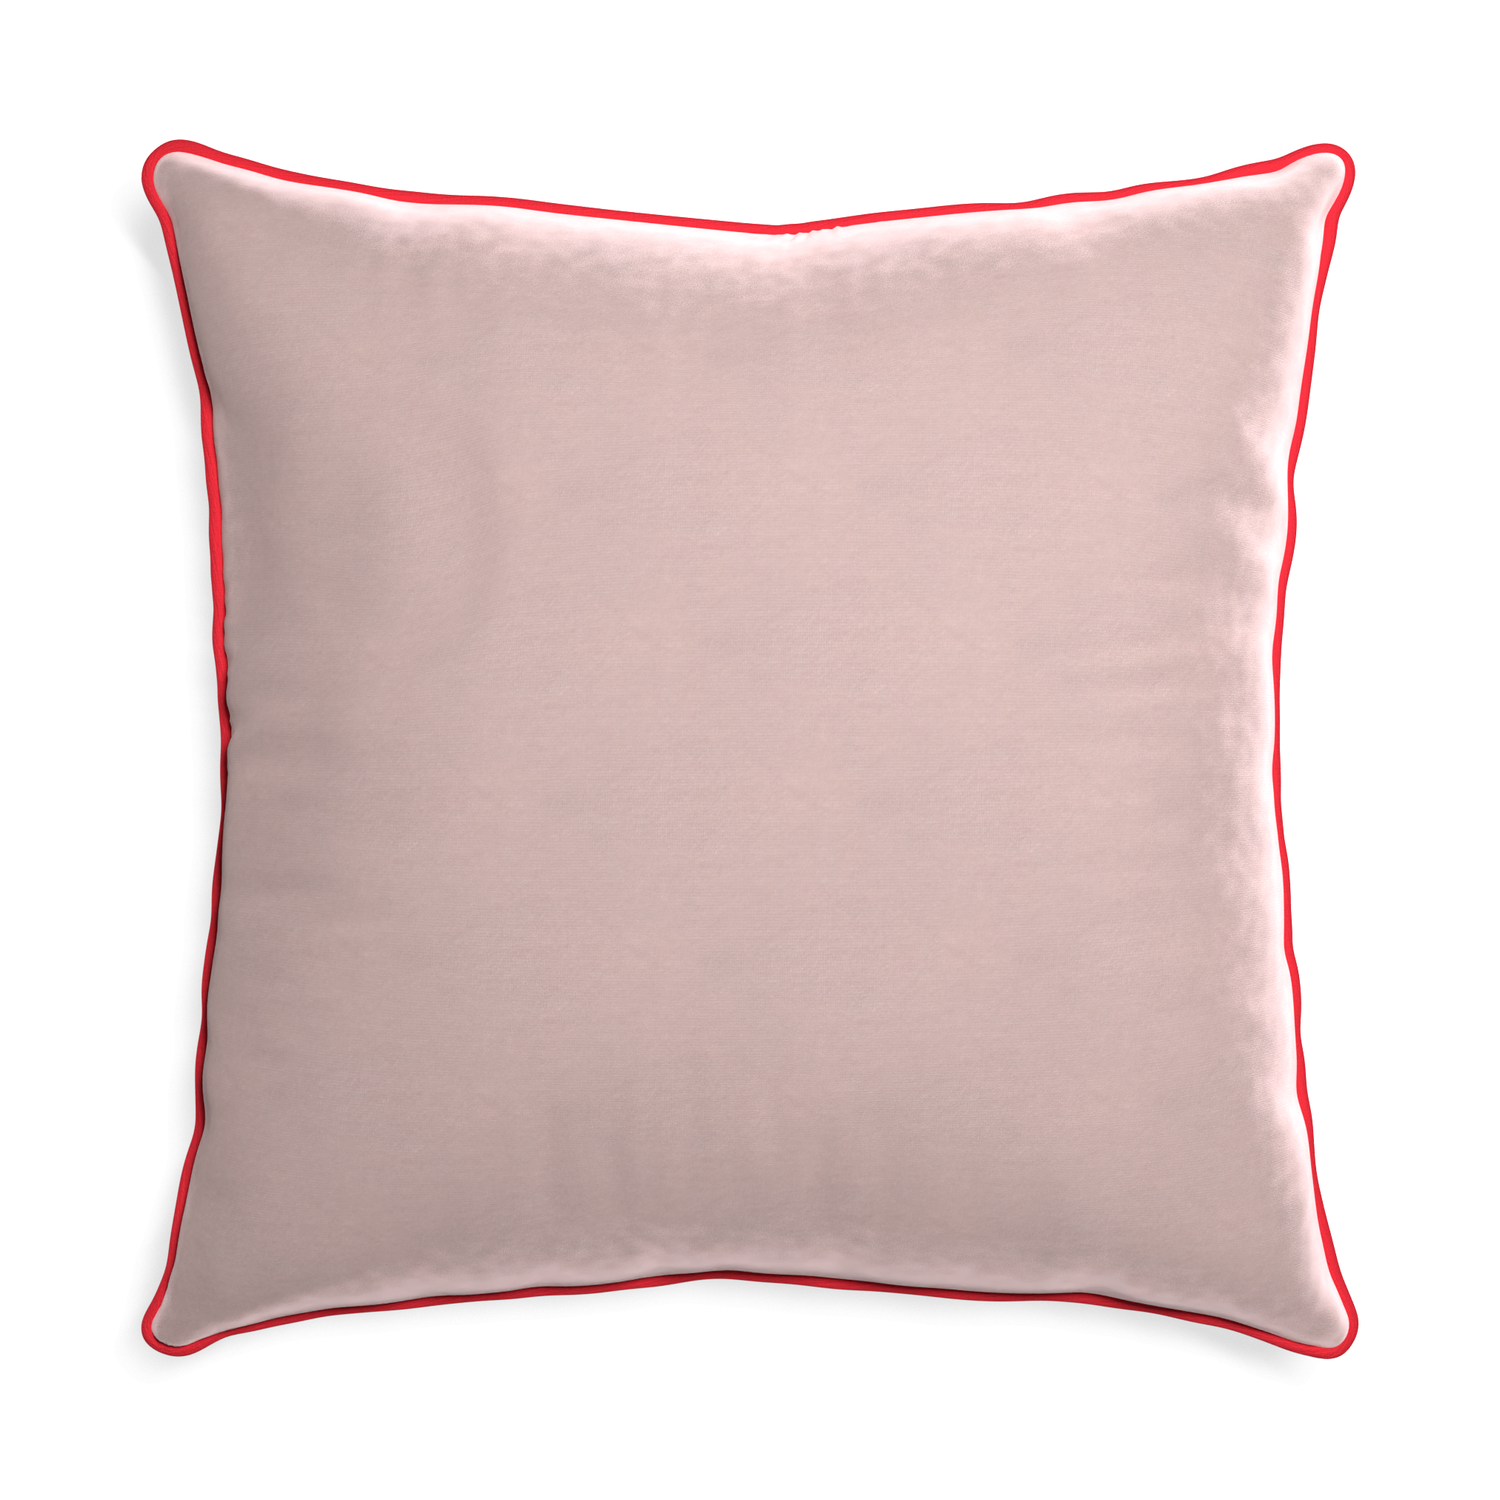 square light pink velvet pillow with red piping 